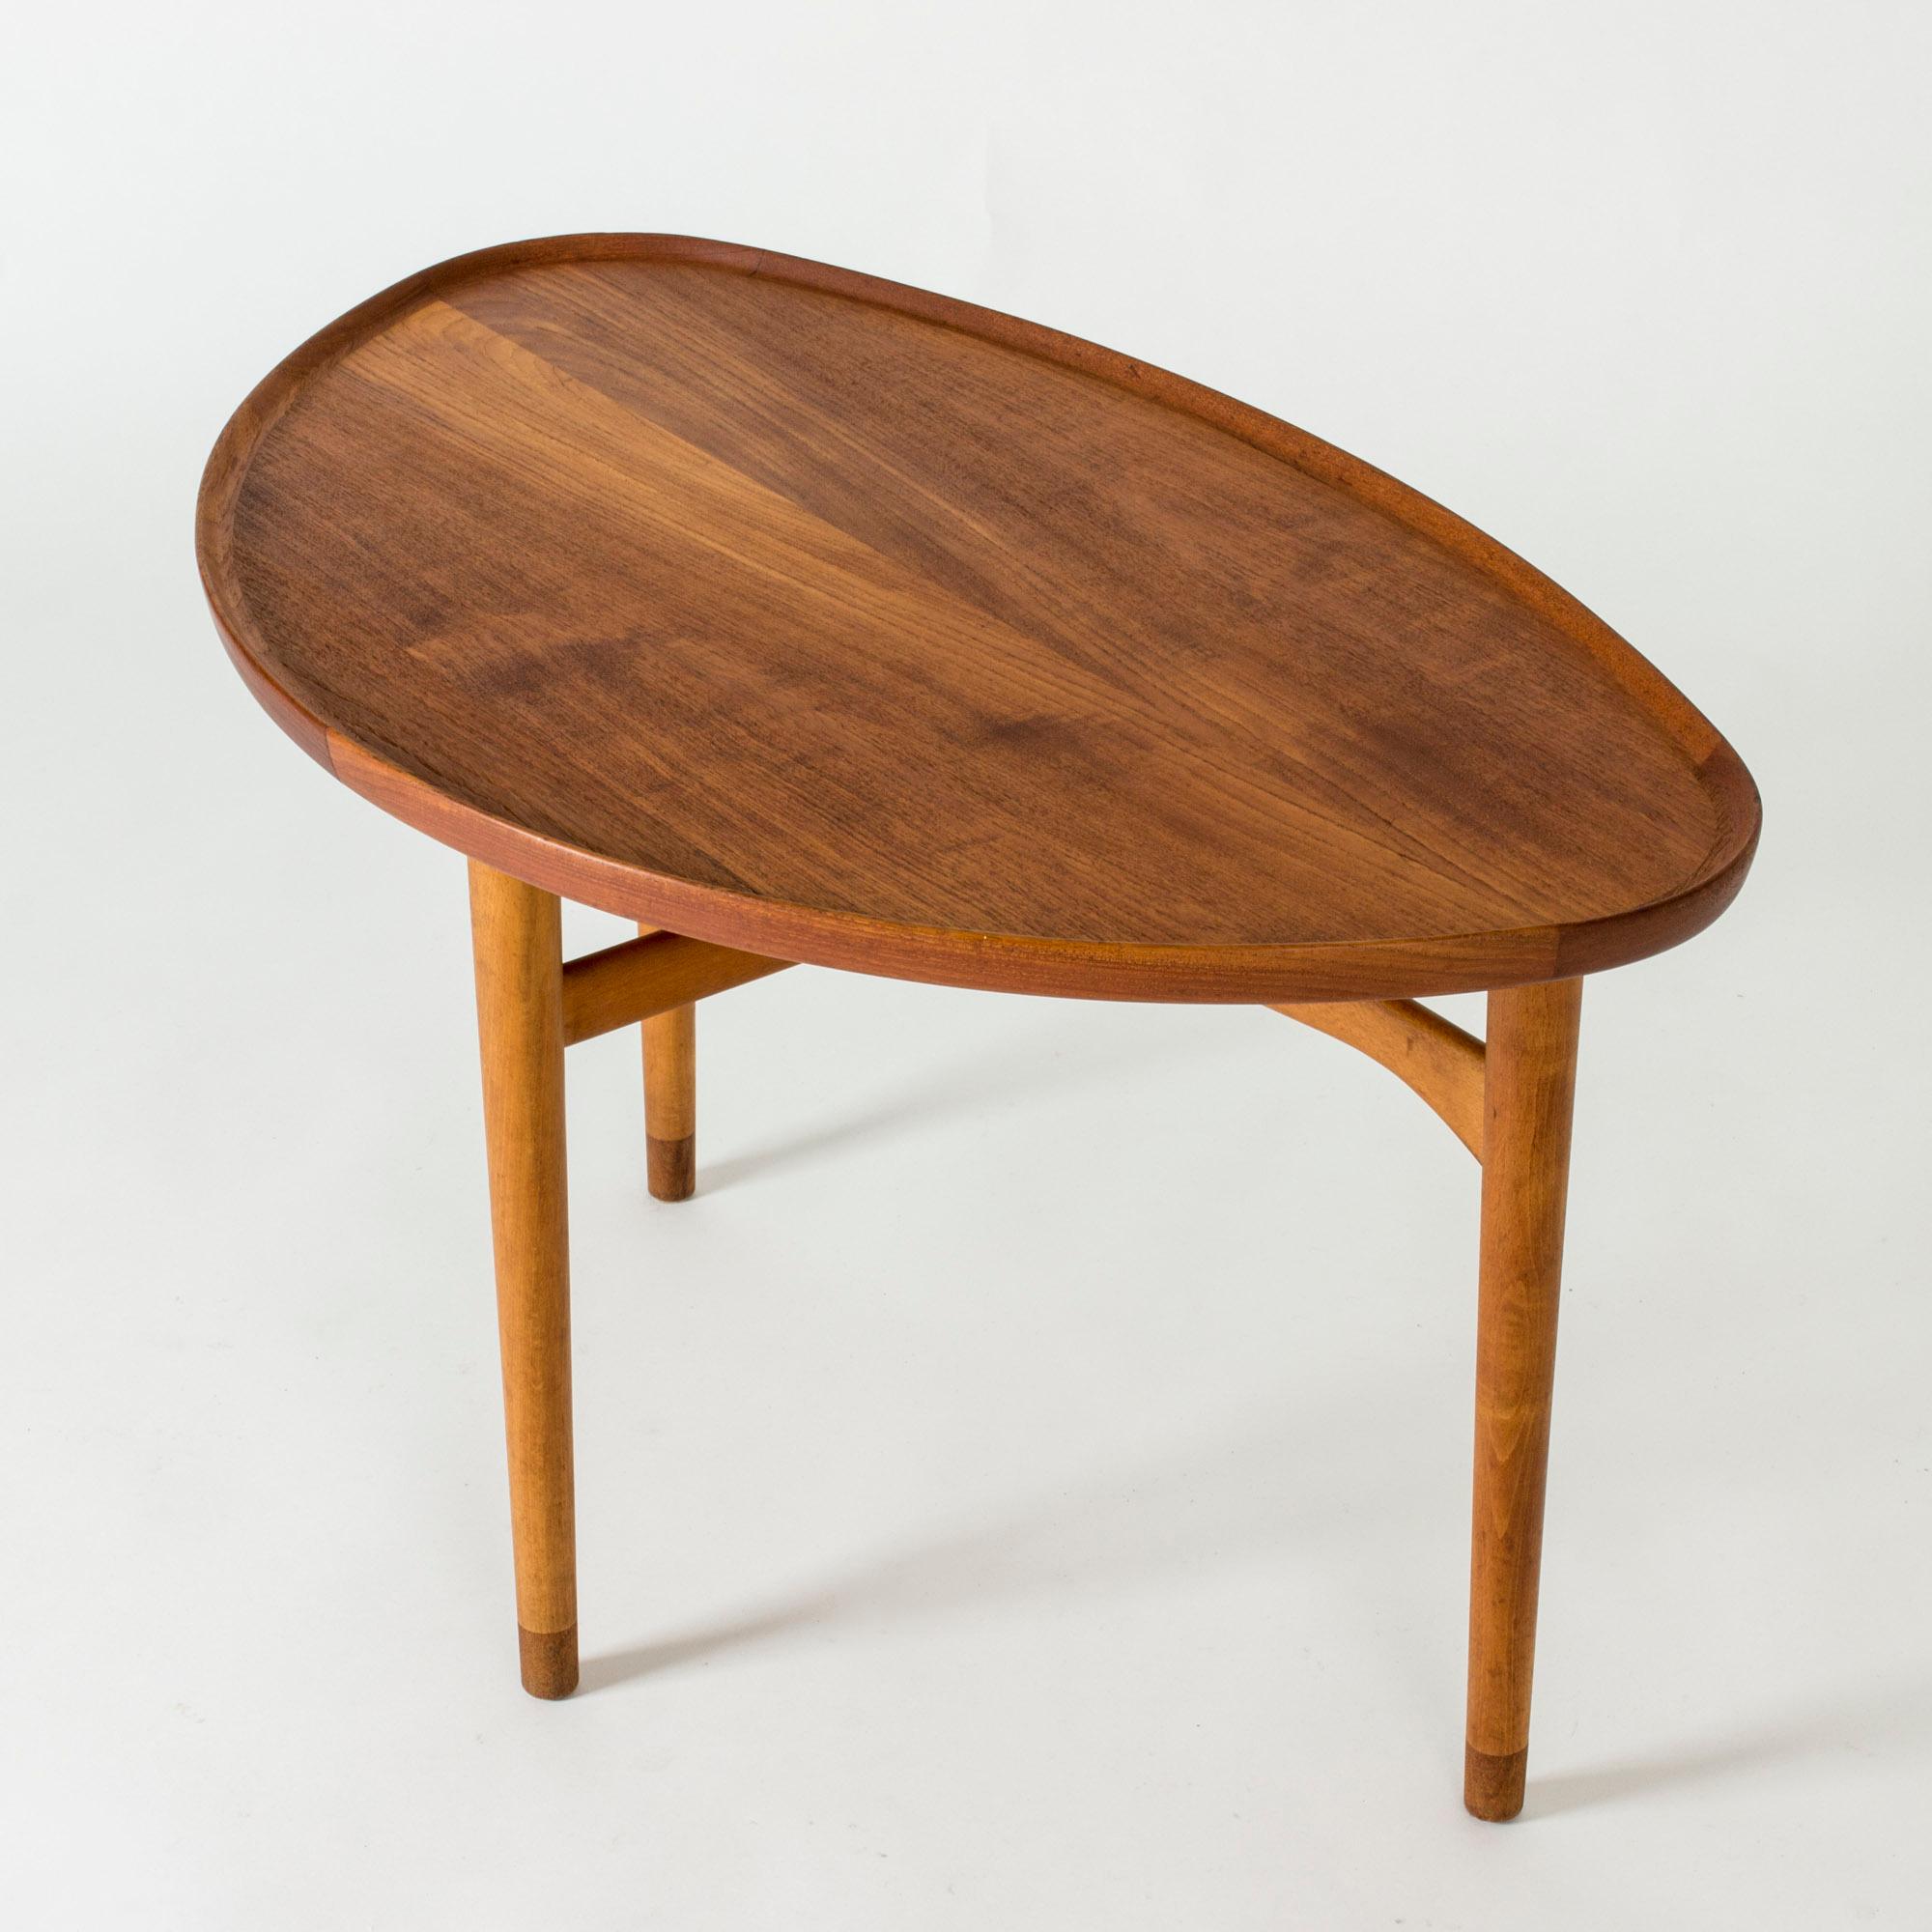 Rare early edition “Eye” coffee table by Finn Juhl, in a kidney shape on three sculpted legs. Excellent execution, smooth wood. This iconic design was originally designed for Carl Brørup and made in a very limited edition.